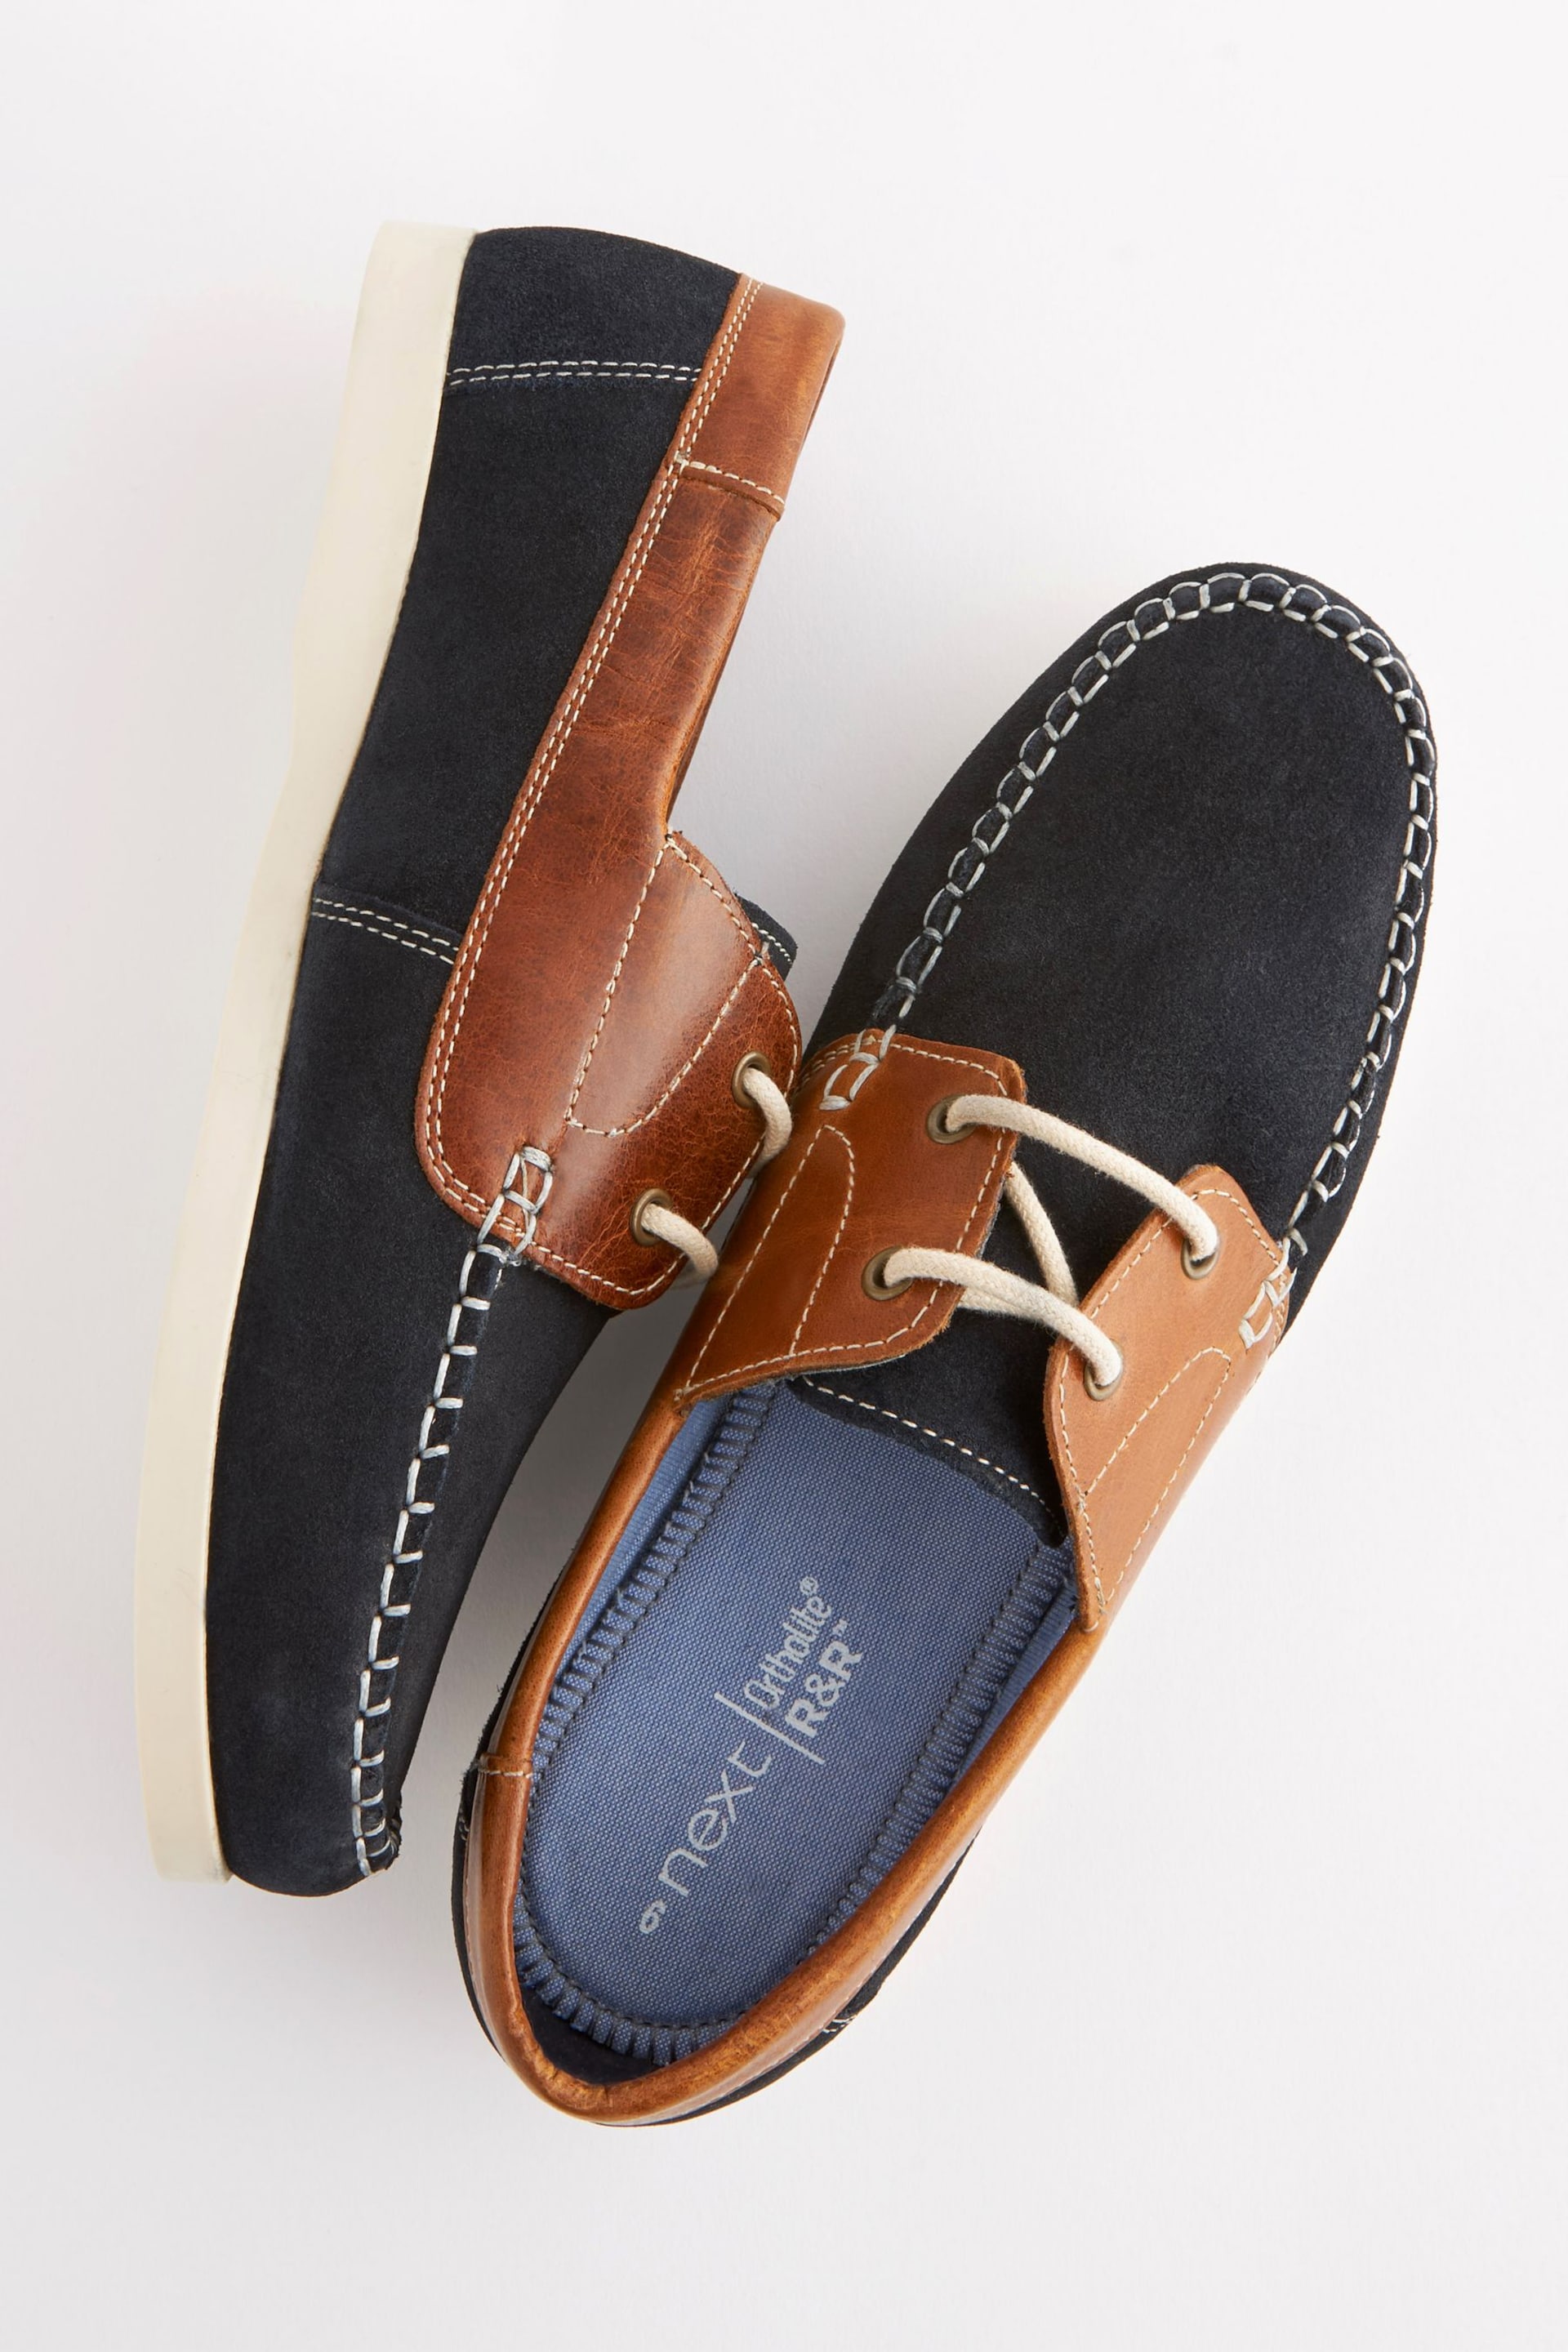 Tan Brown/Navy Blue Leather Boat Shoes - Image 3 of 6